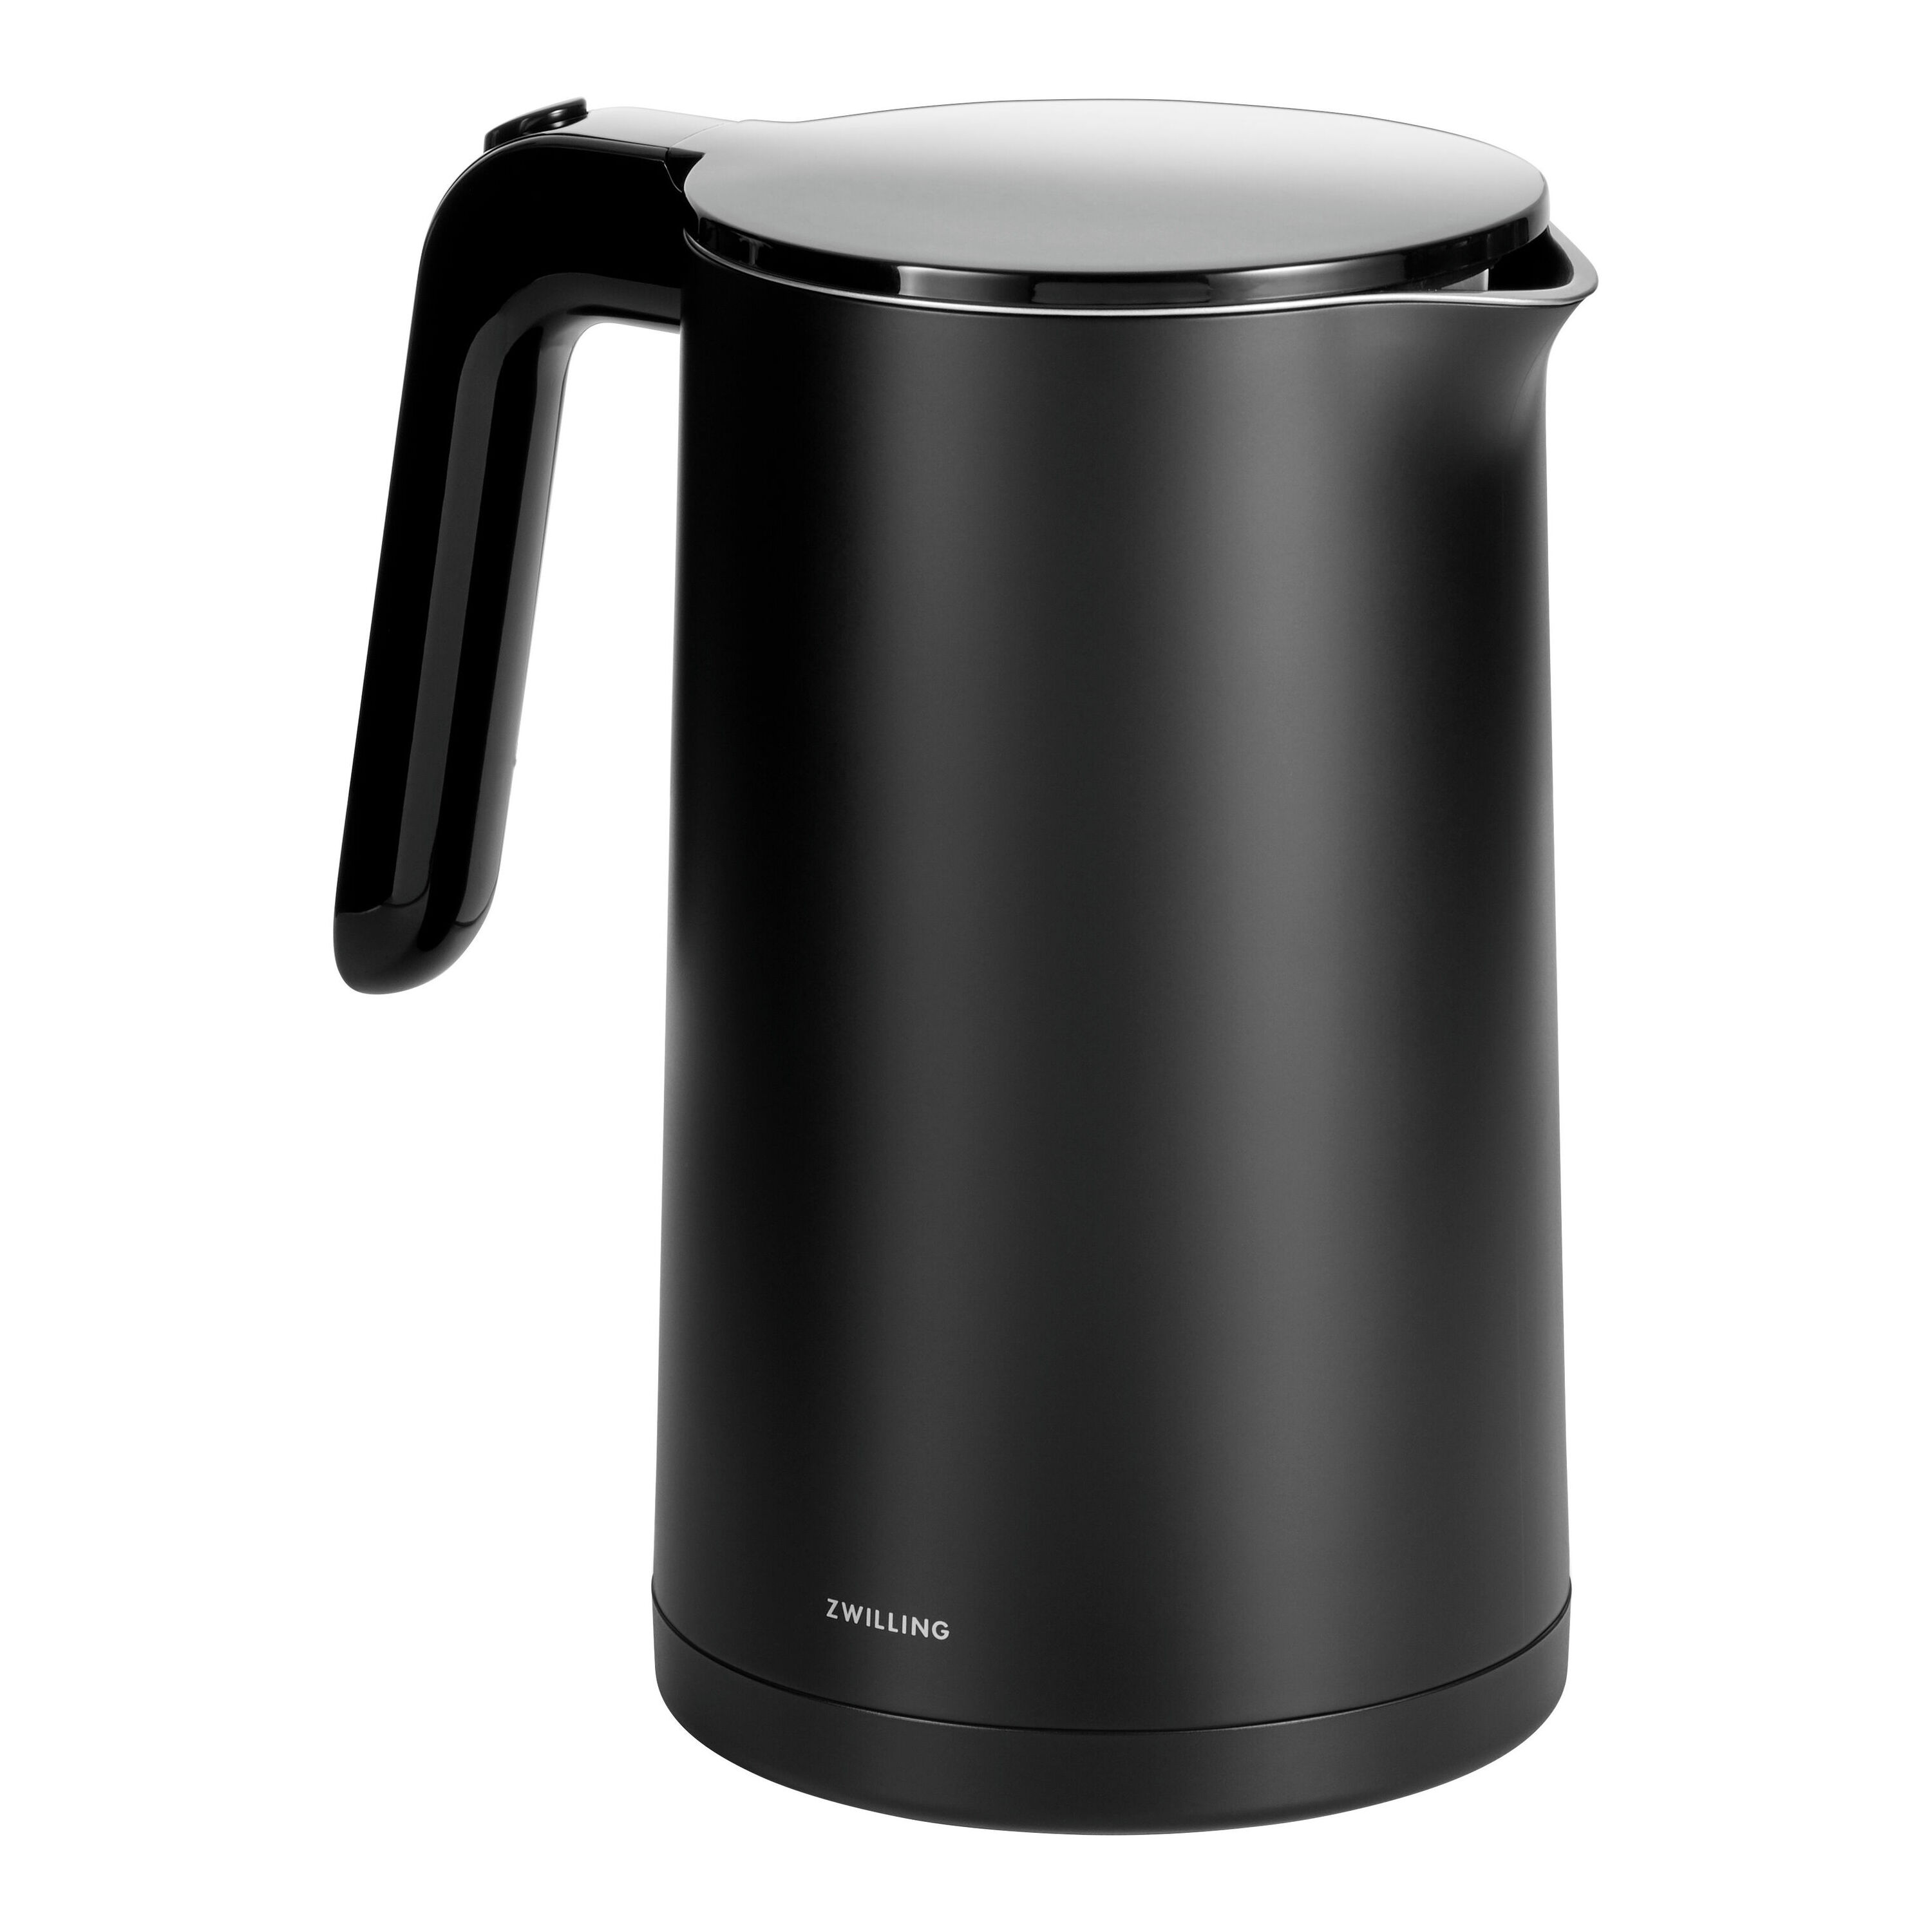 ZWILLING Enfinigy 1.5 l, Cool Touch Kettle - Black